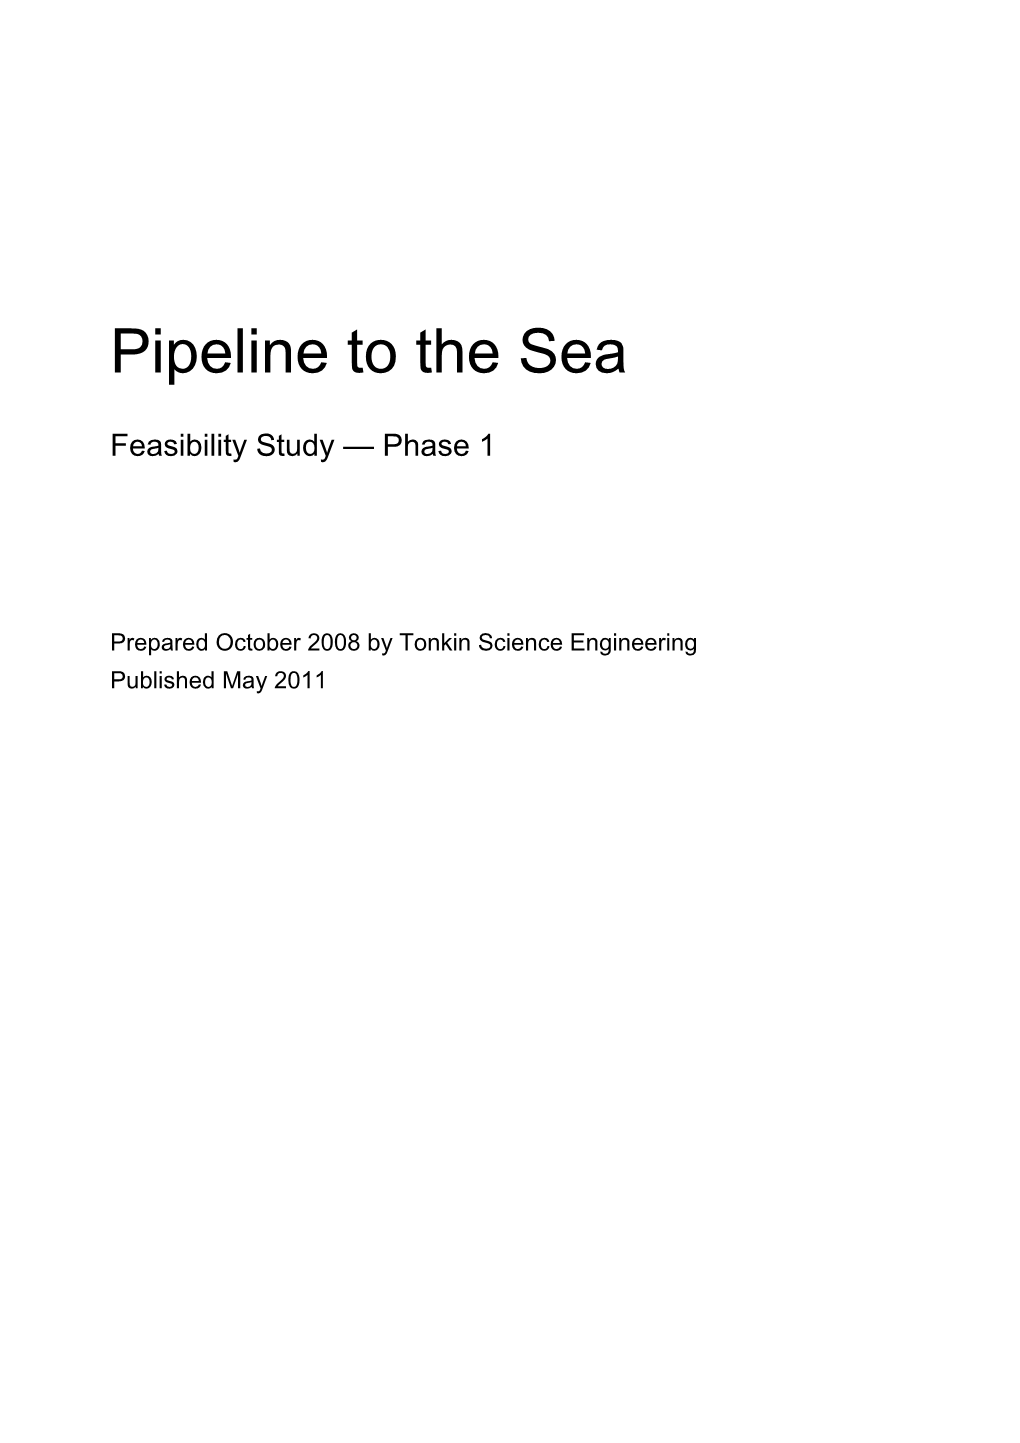 Pipeline to the Sea Feasibility Study Phase 1 - May 2011